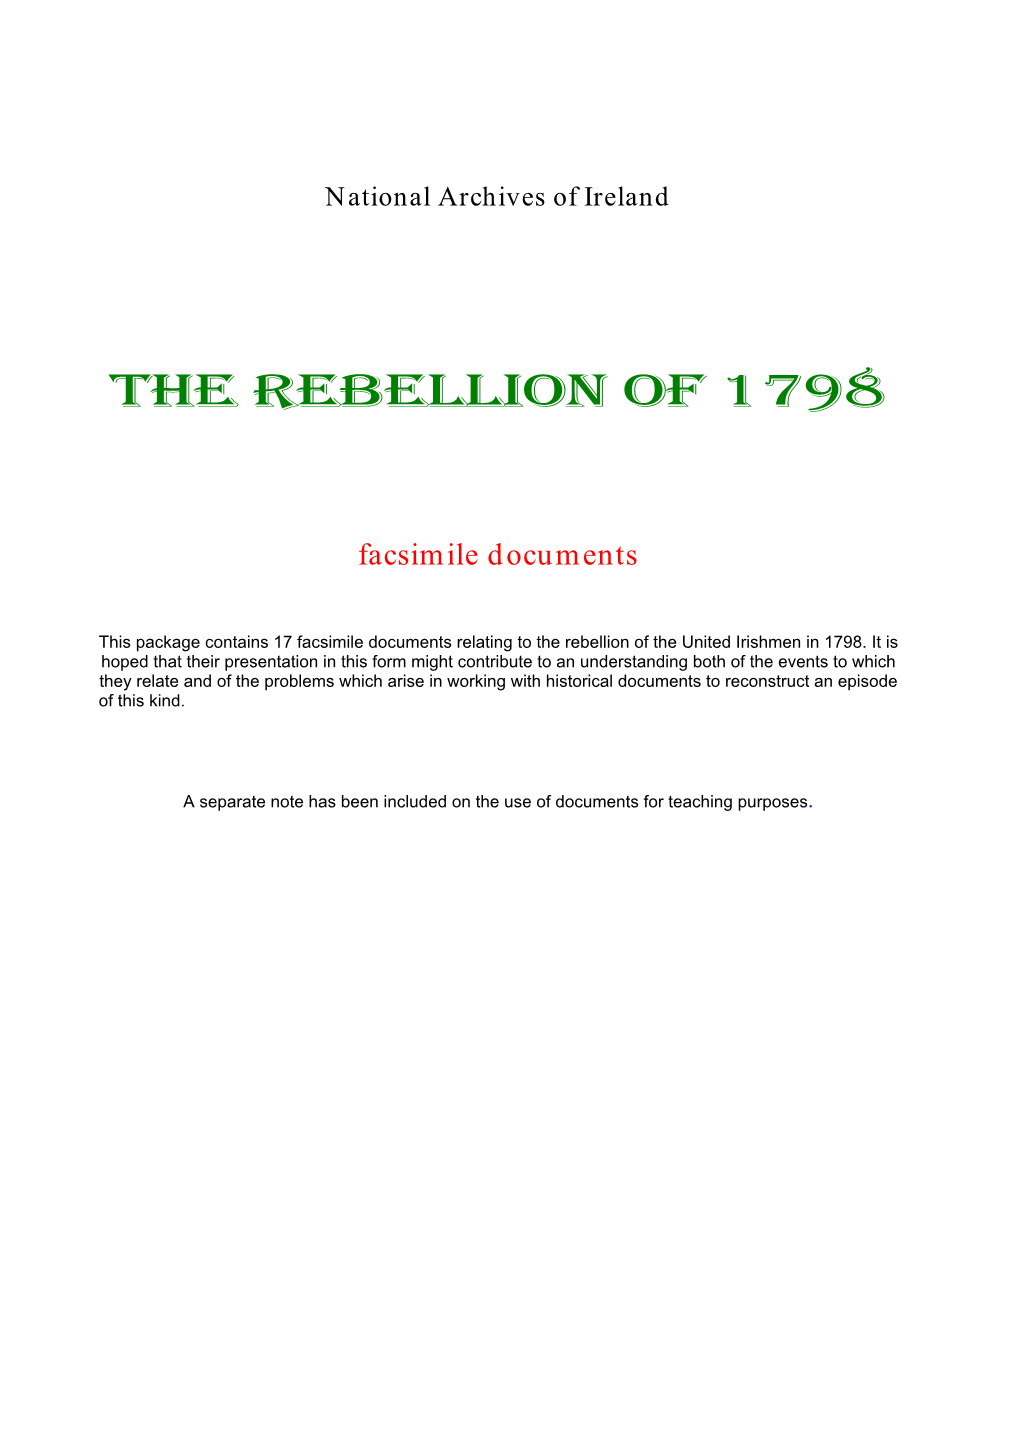 The Rebellion of 1798